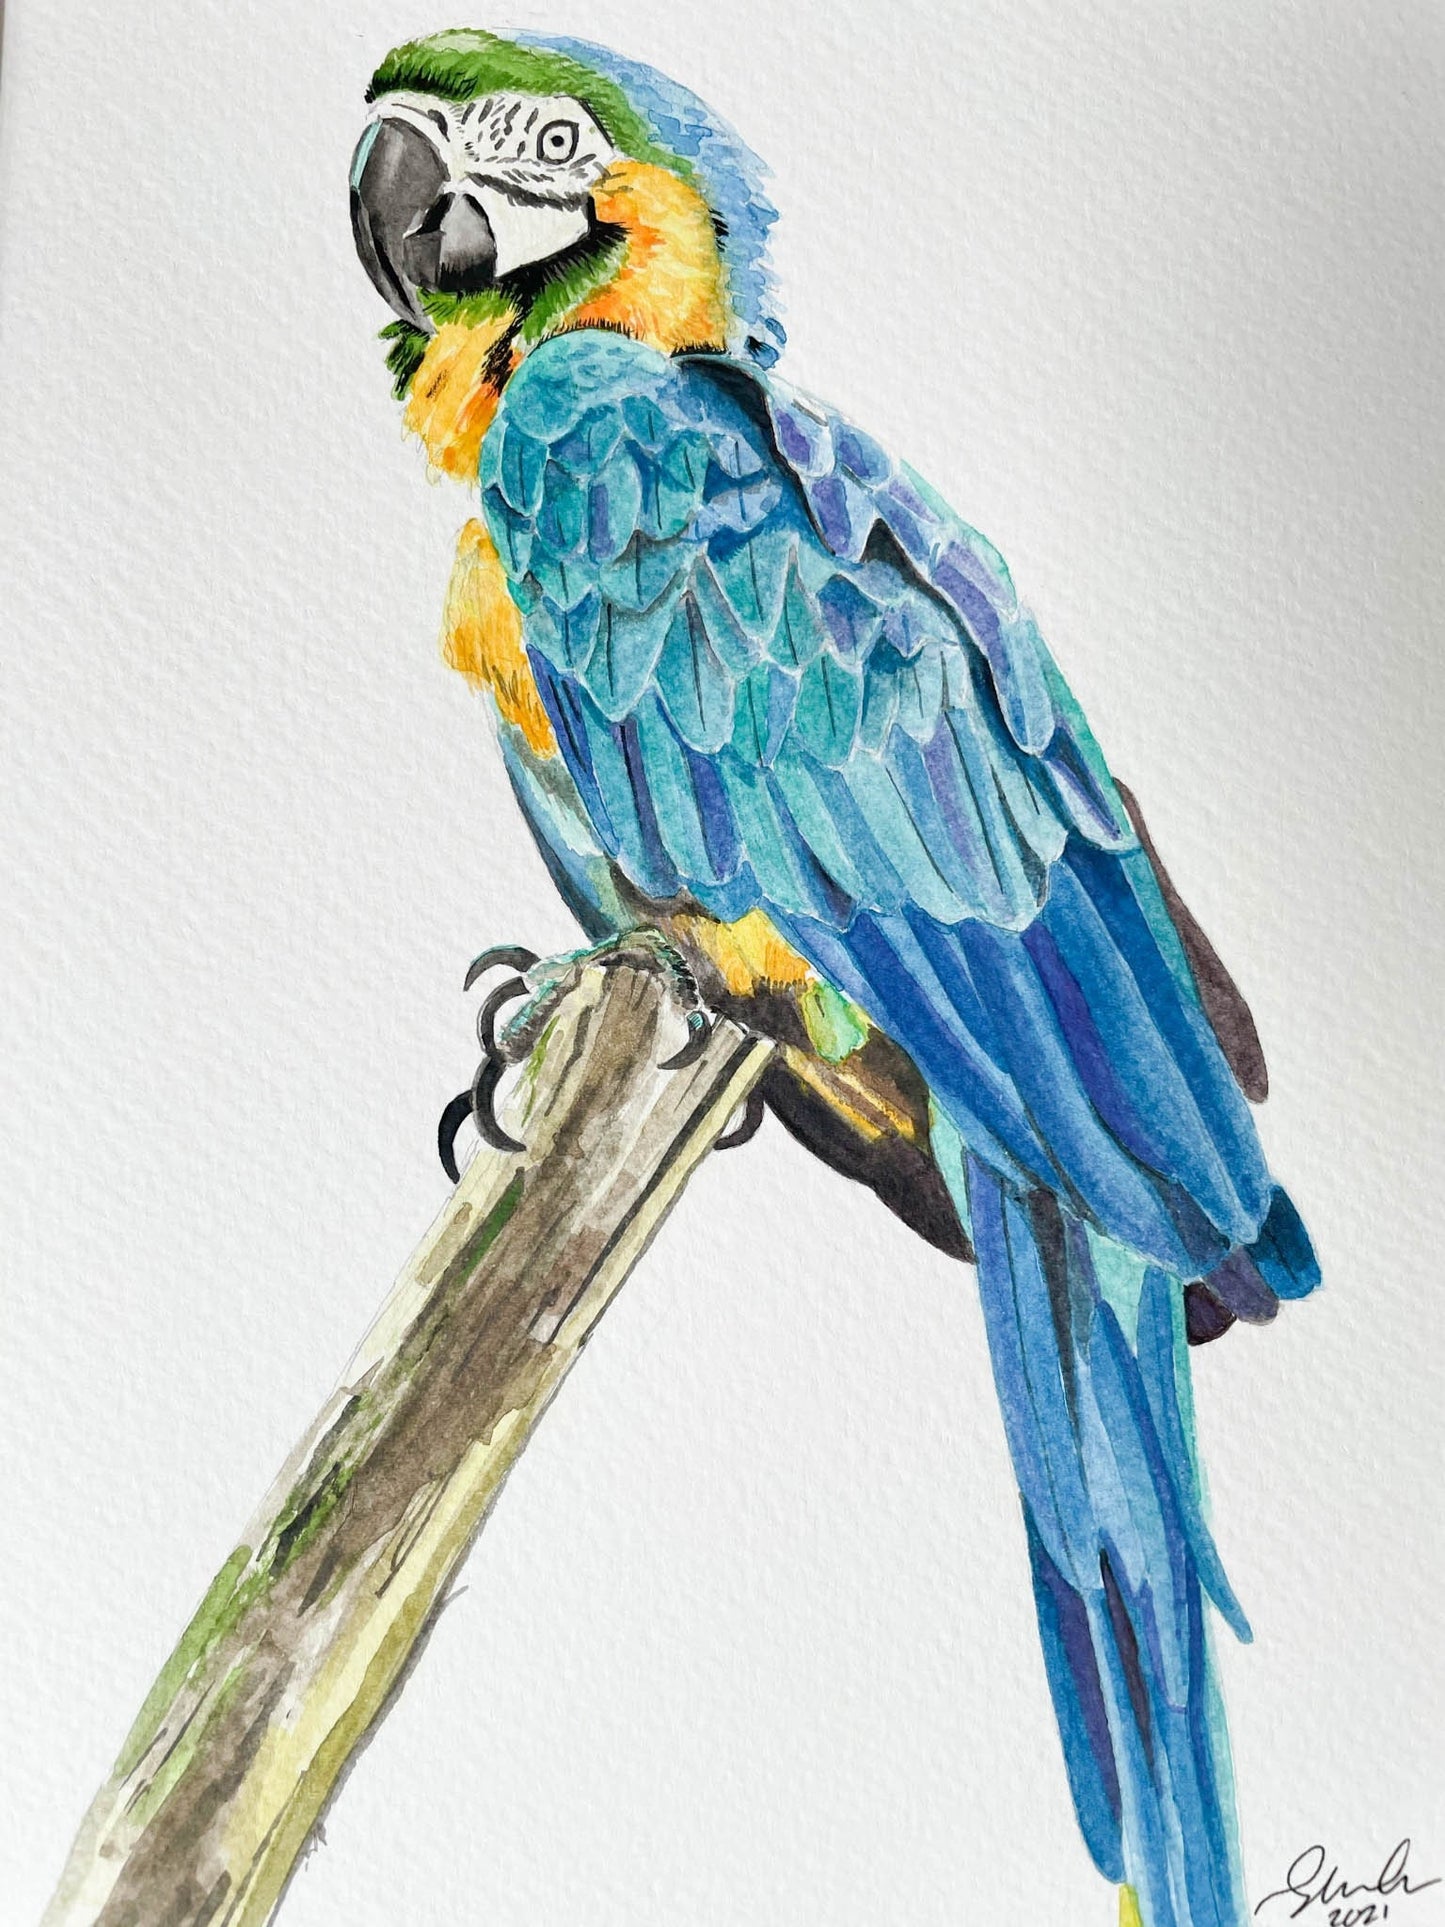 An original watercolour painting of a macaw